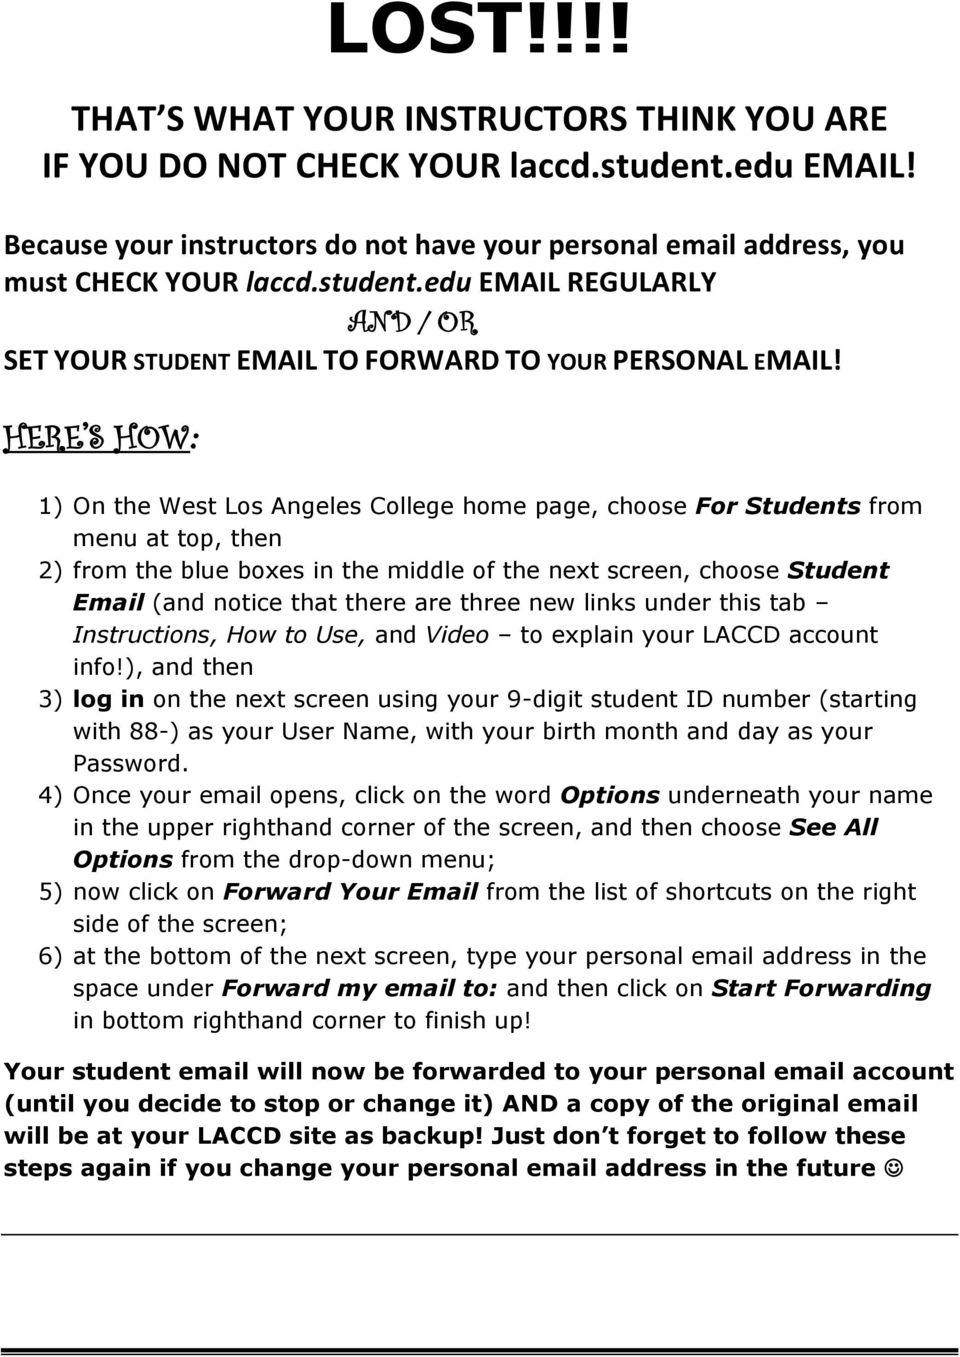 HERE S HOW: 1) On the West Los Angeles College home page, choose For Students from menu at top, then 2) from the blue boxes in the middle of the next screen, choose Student Email (and notice that